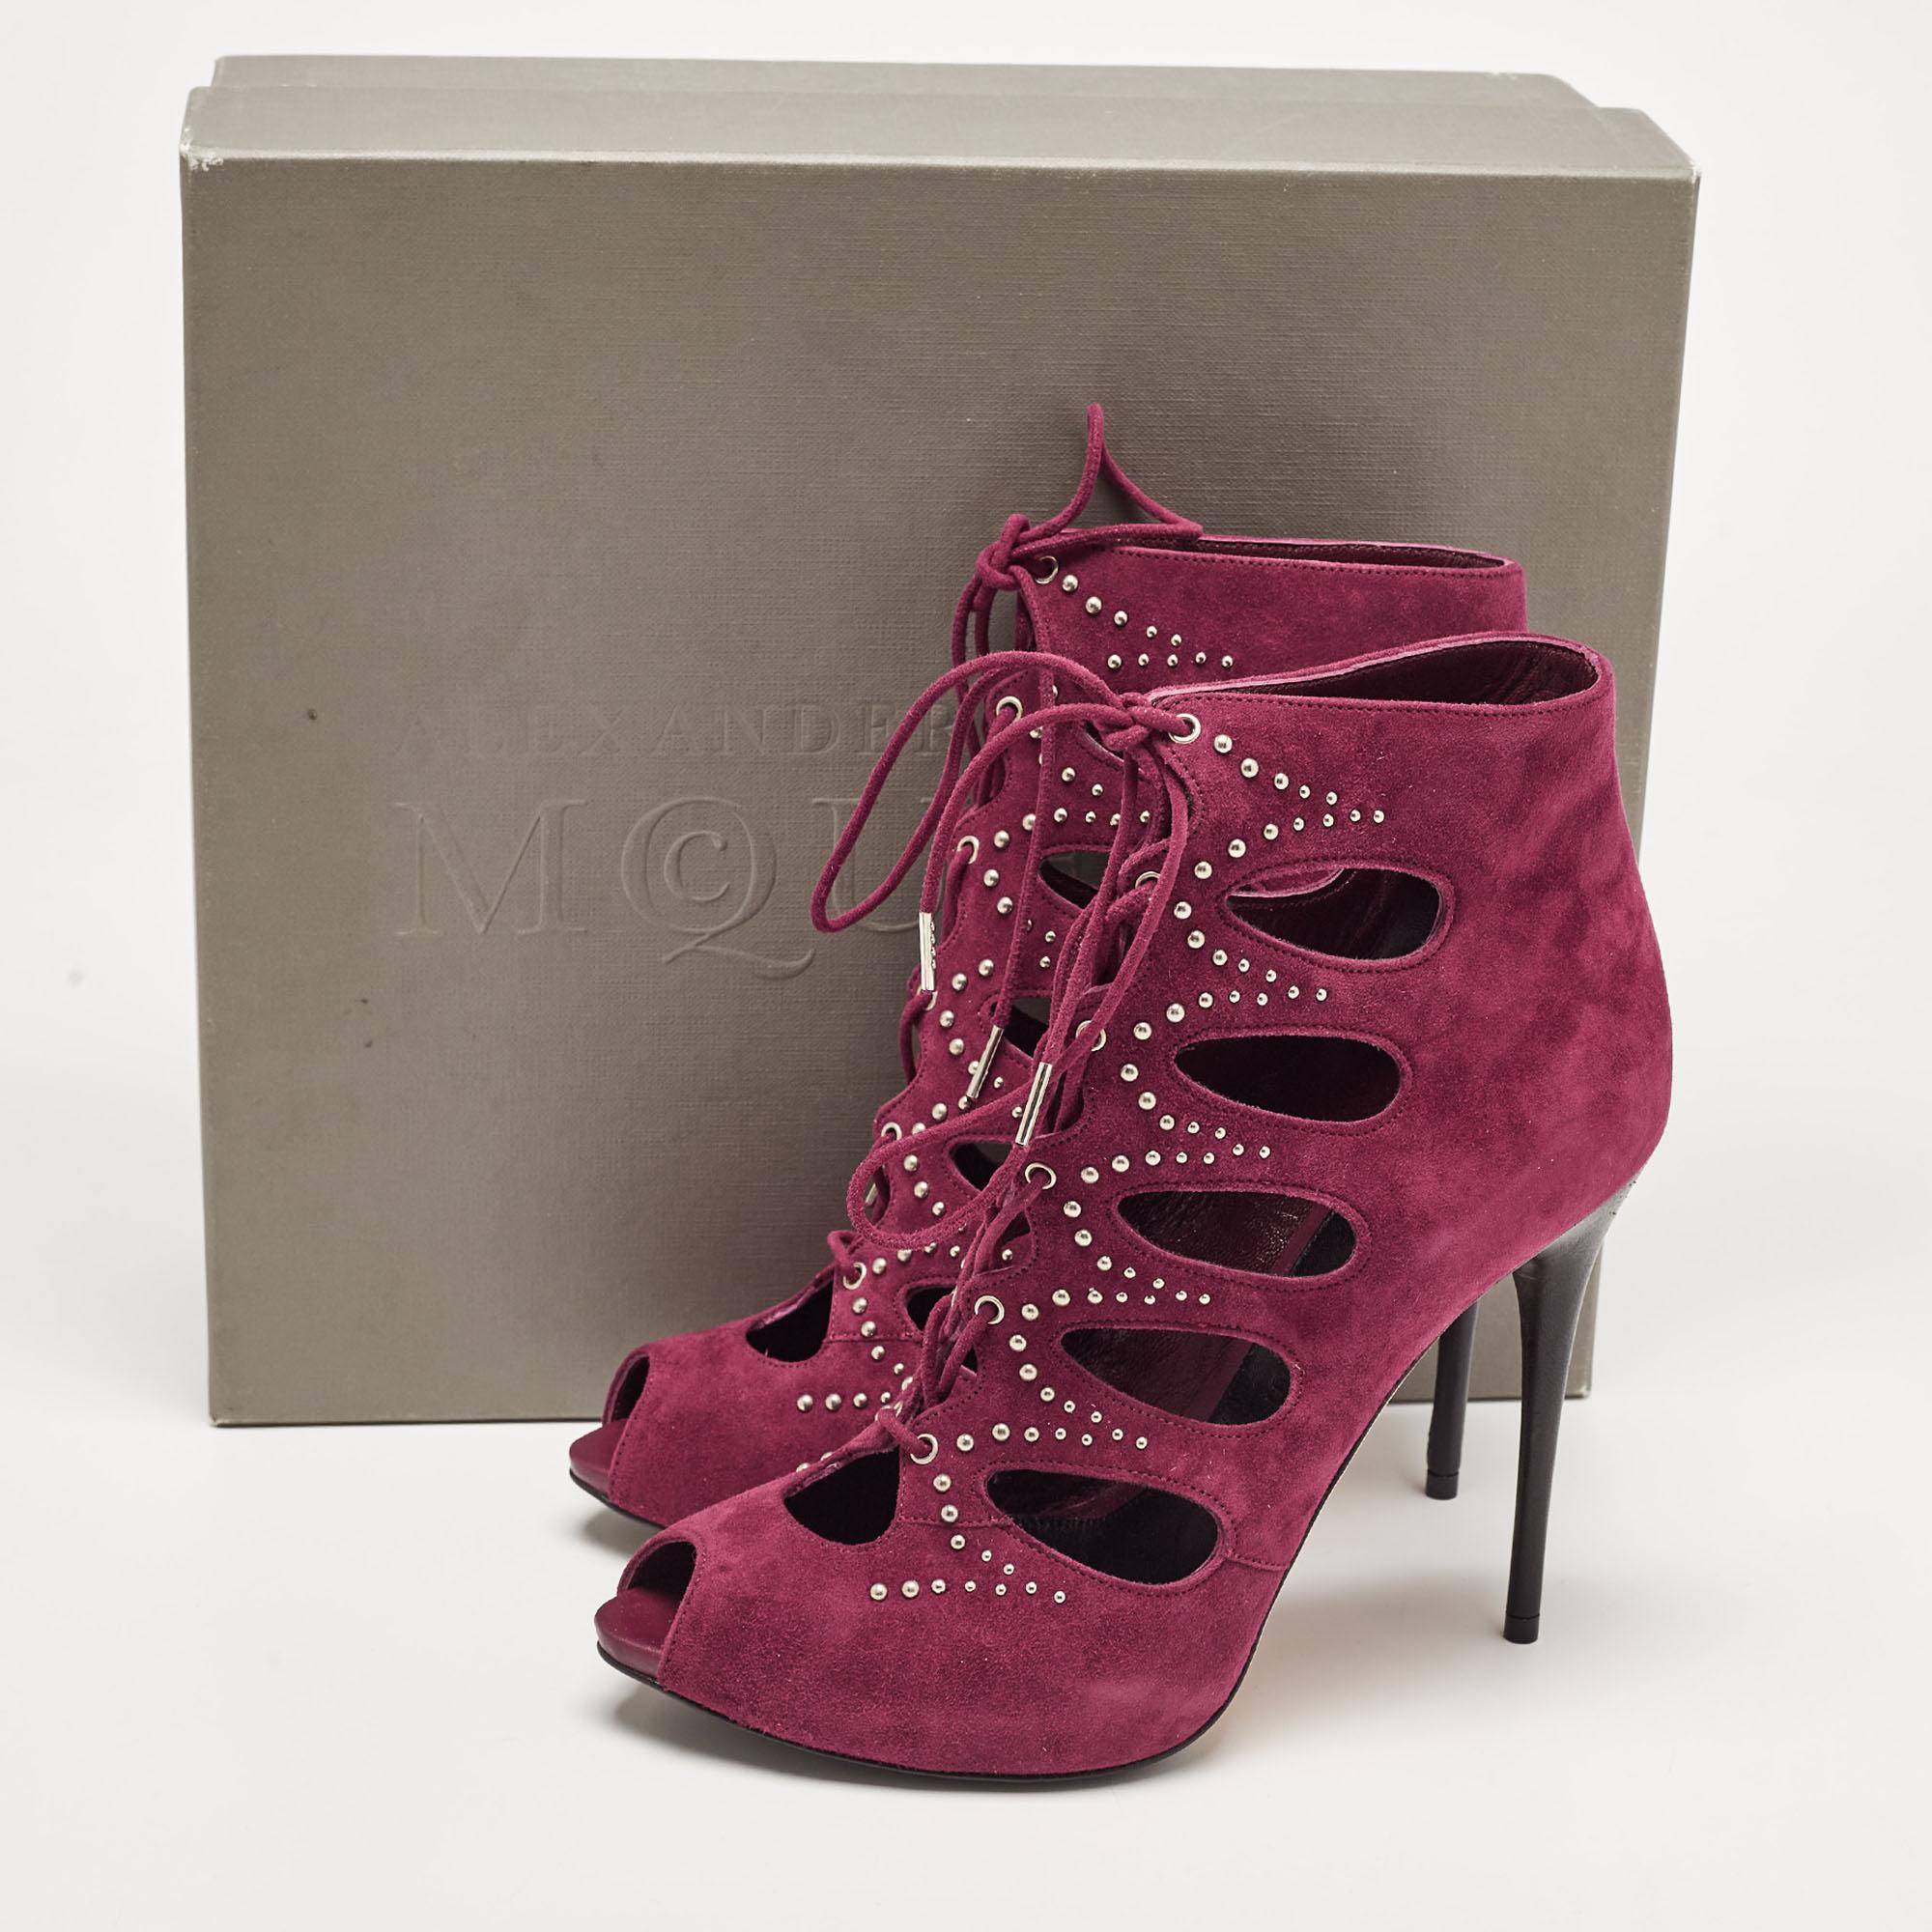 Alexander McQueen Suede Cut Out Embellished Lace Up Ankle Booties Size 37.5 For Sale 6